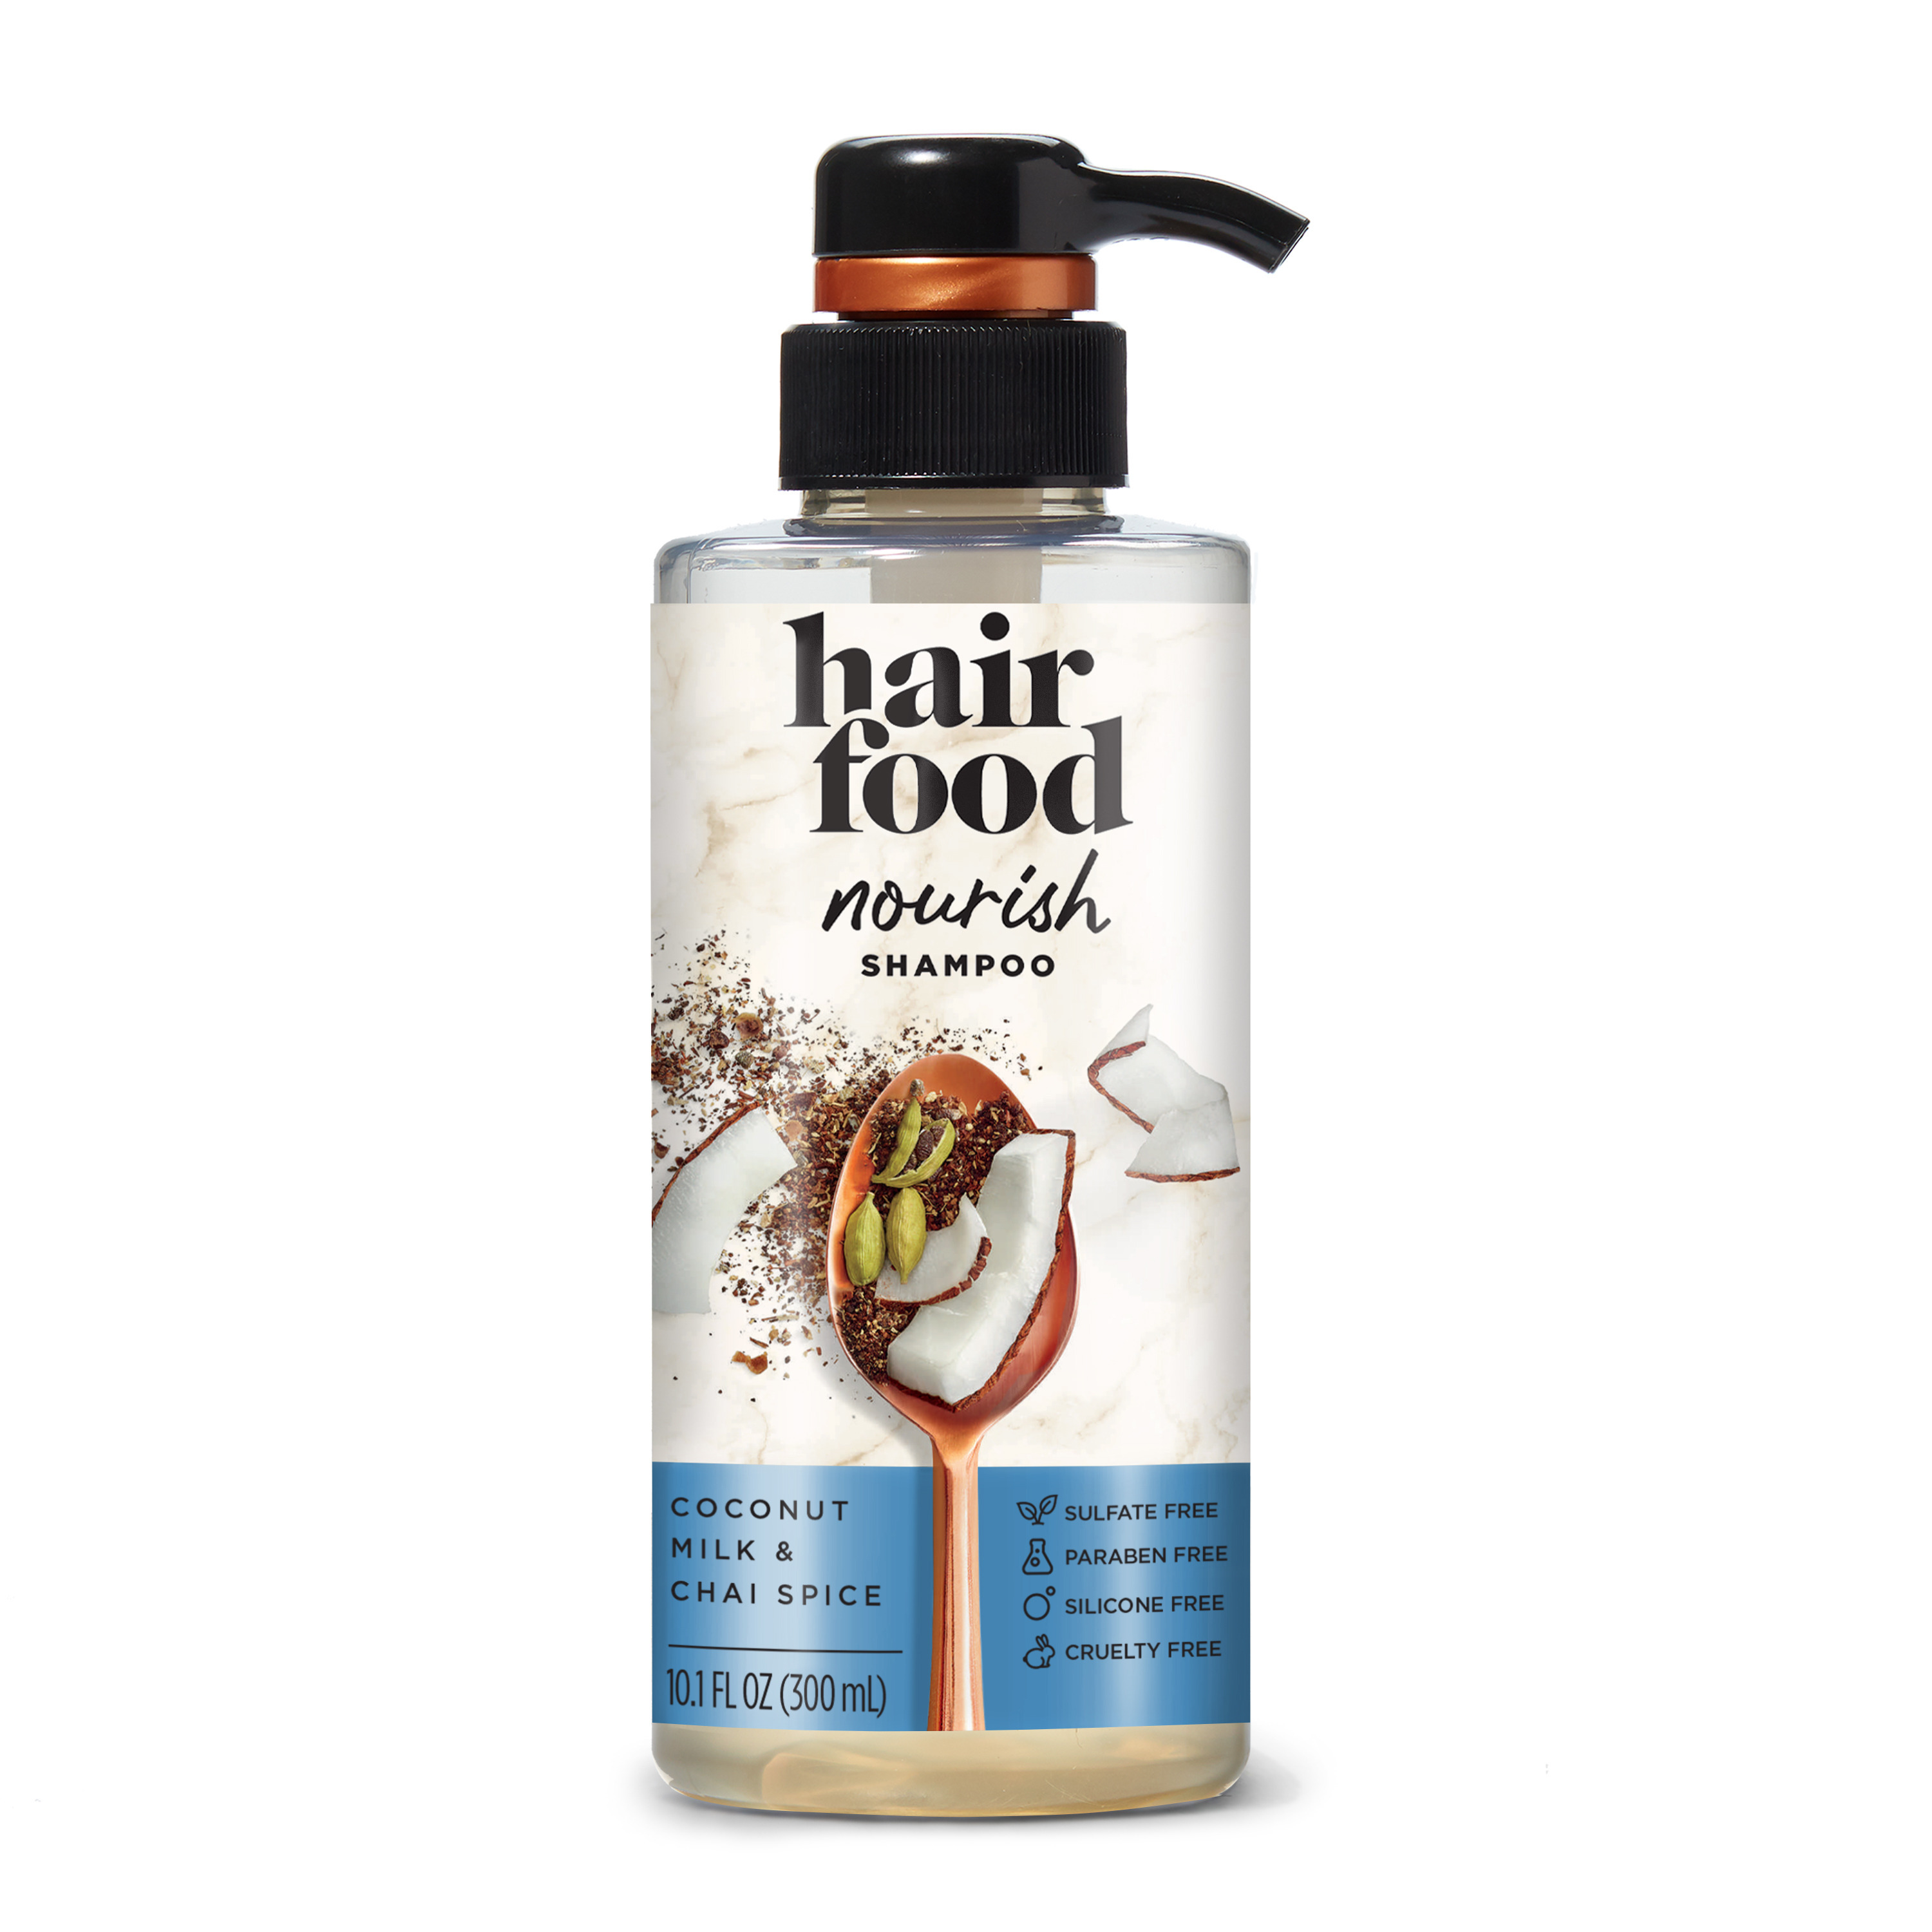 Hair Food Nourishing Shampoo, Coconut and Chai Spice, 10.1 fl oz for All Hair Types - image 1 of 11